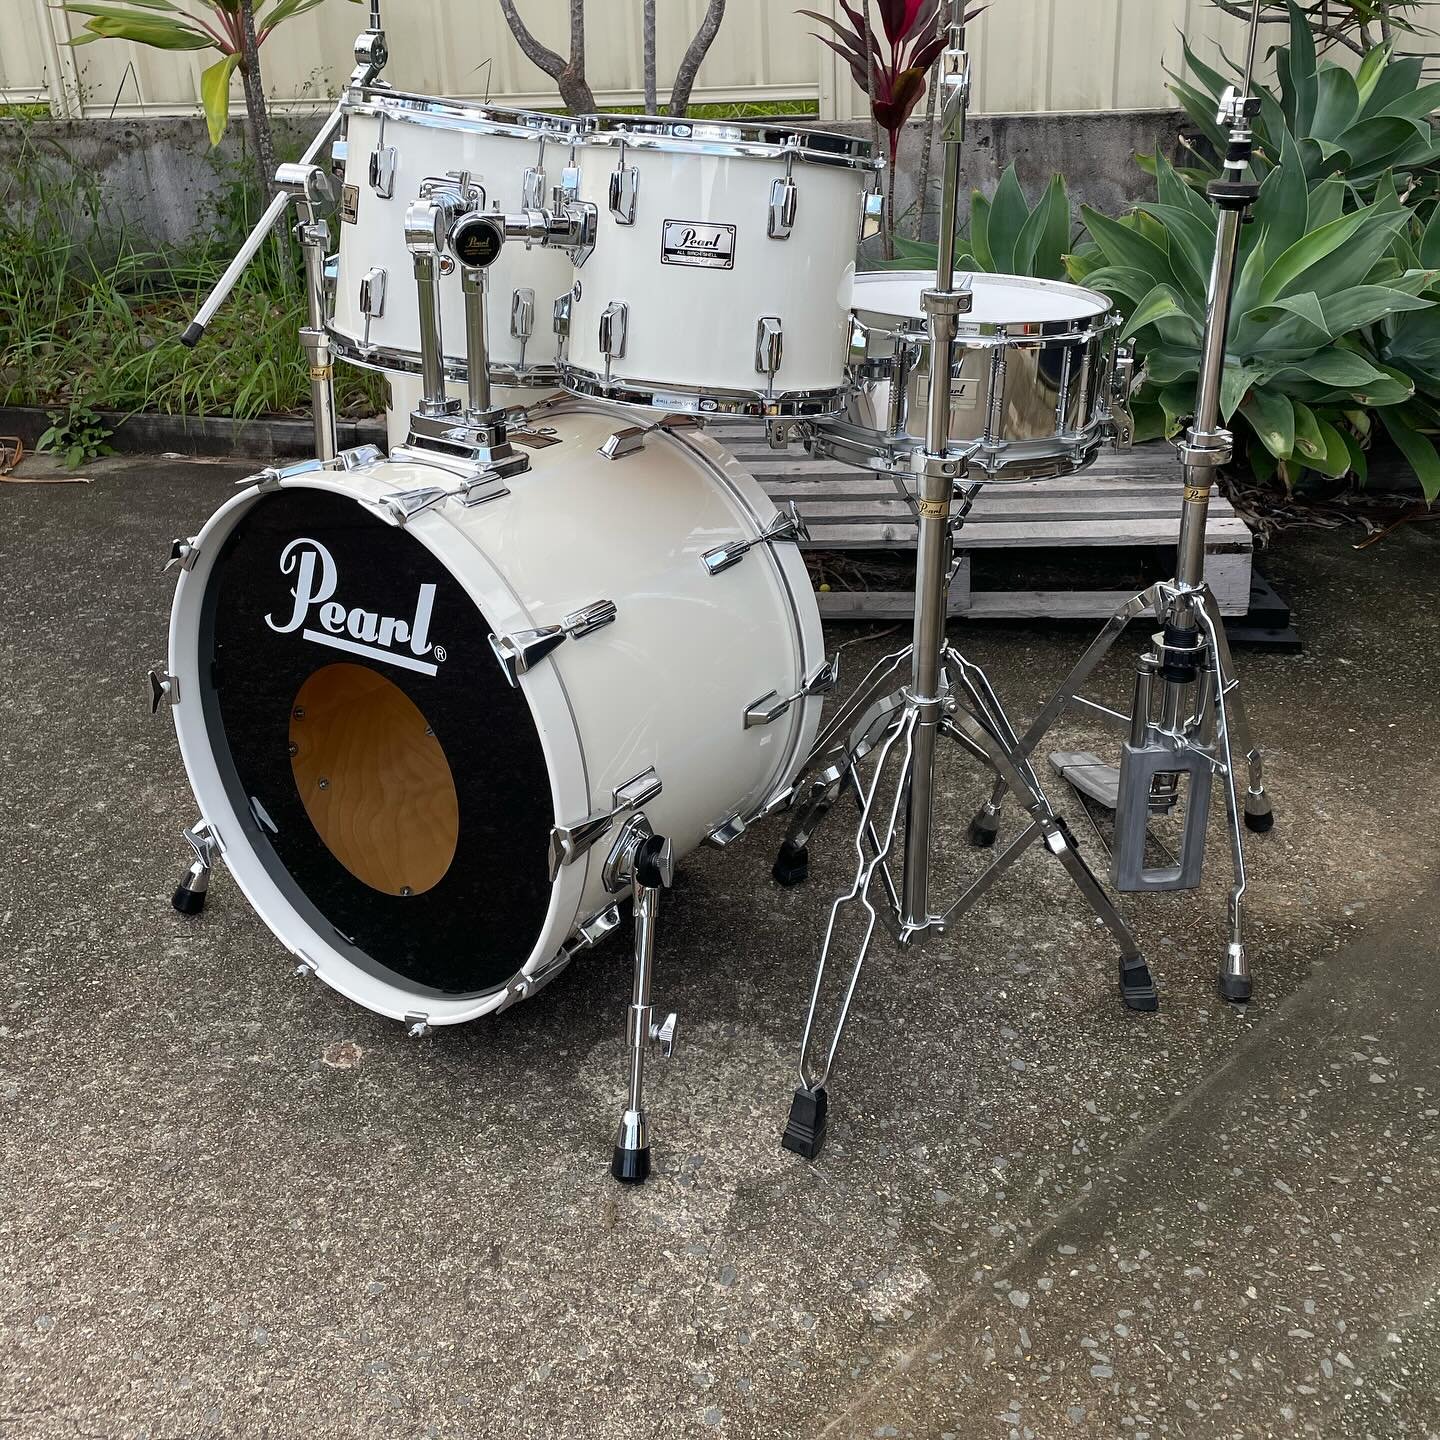 Pearl BLX (all birch) from around 1986-7, which at the time was Pearls answer to compete with Yamaha 9000/RC and to be honest, Pearl fully nailed these beautifully timeless birch shells. 

This kit had been in storage for many years all the way out i